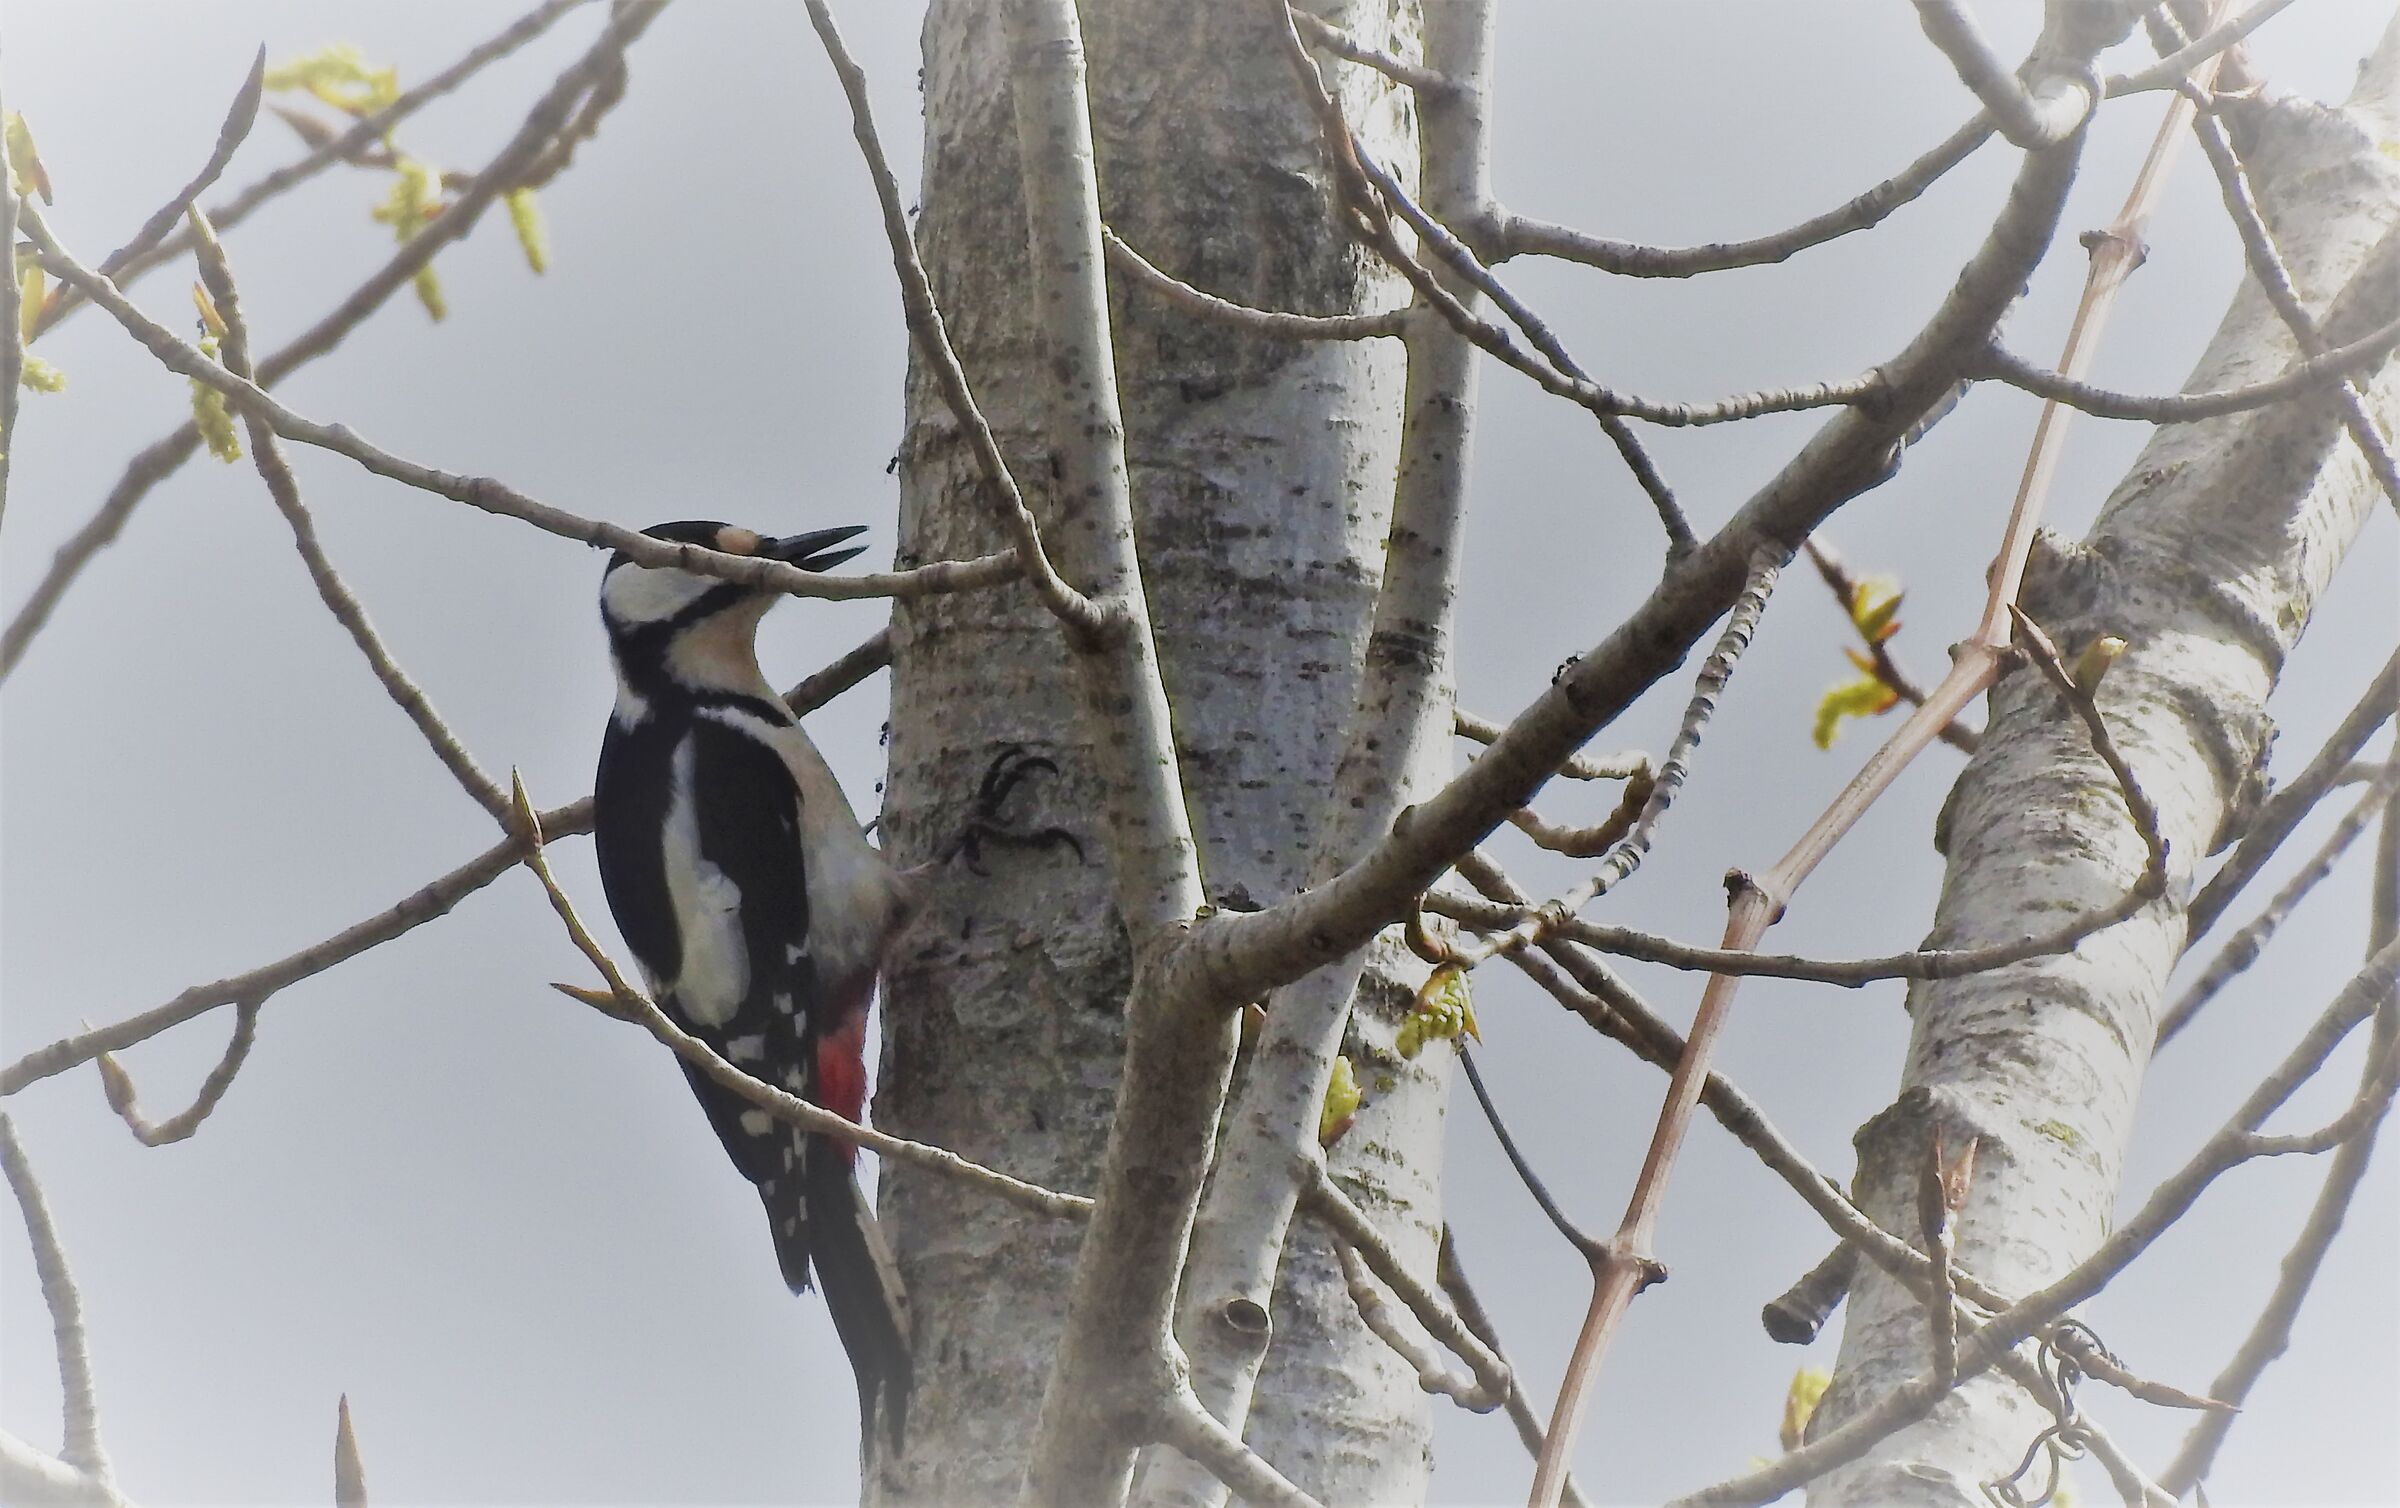 Woodpecker and ants...